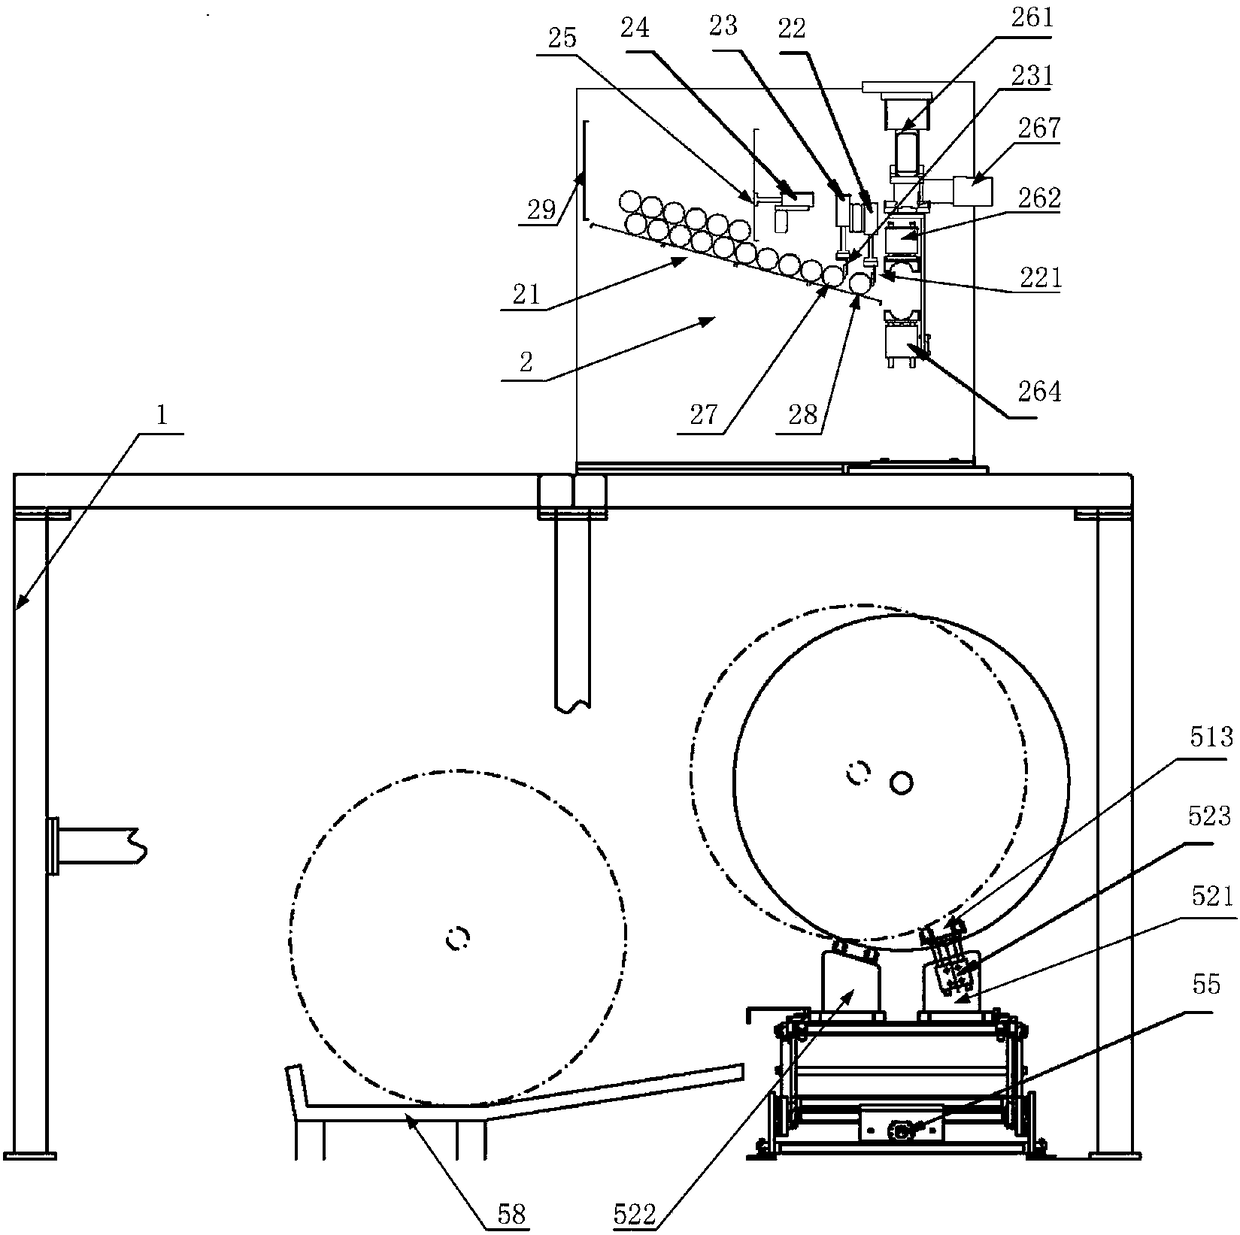 Air bubble film full-automatic winding device